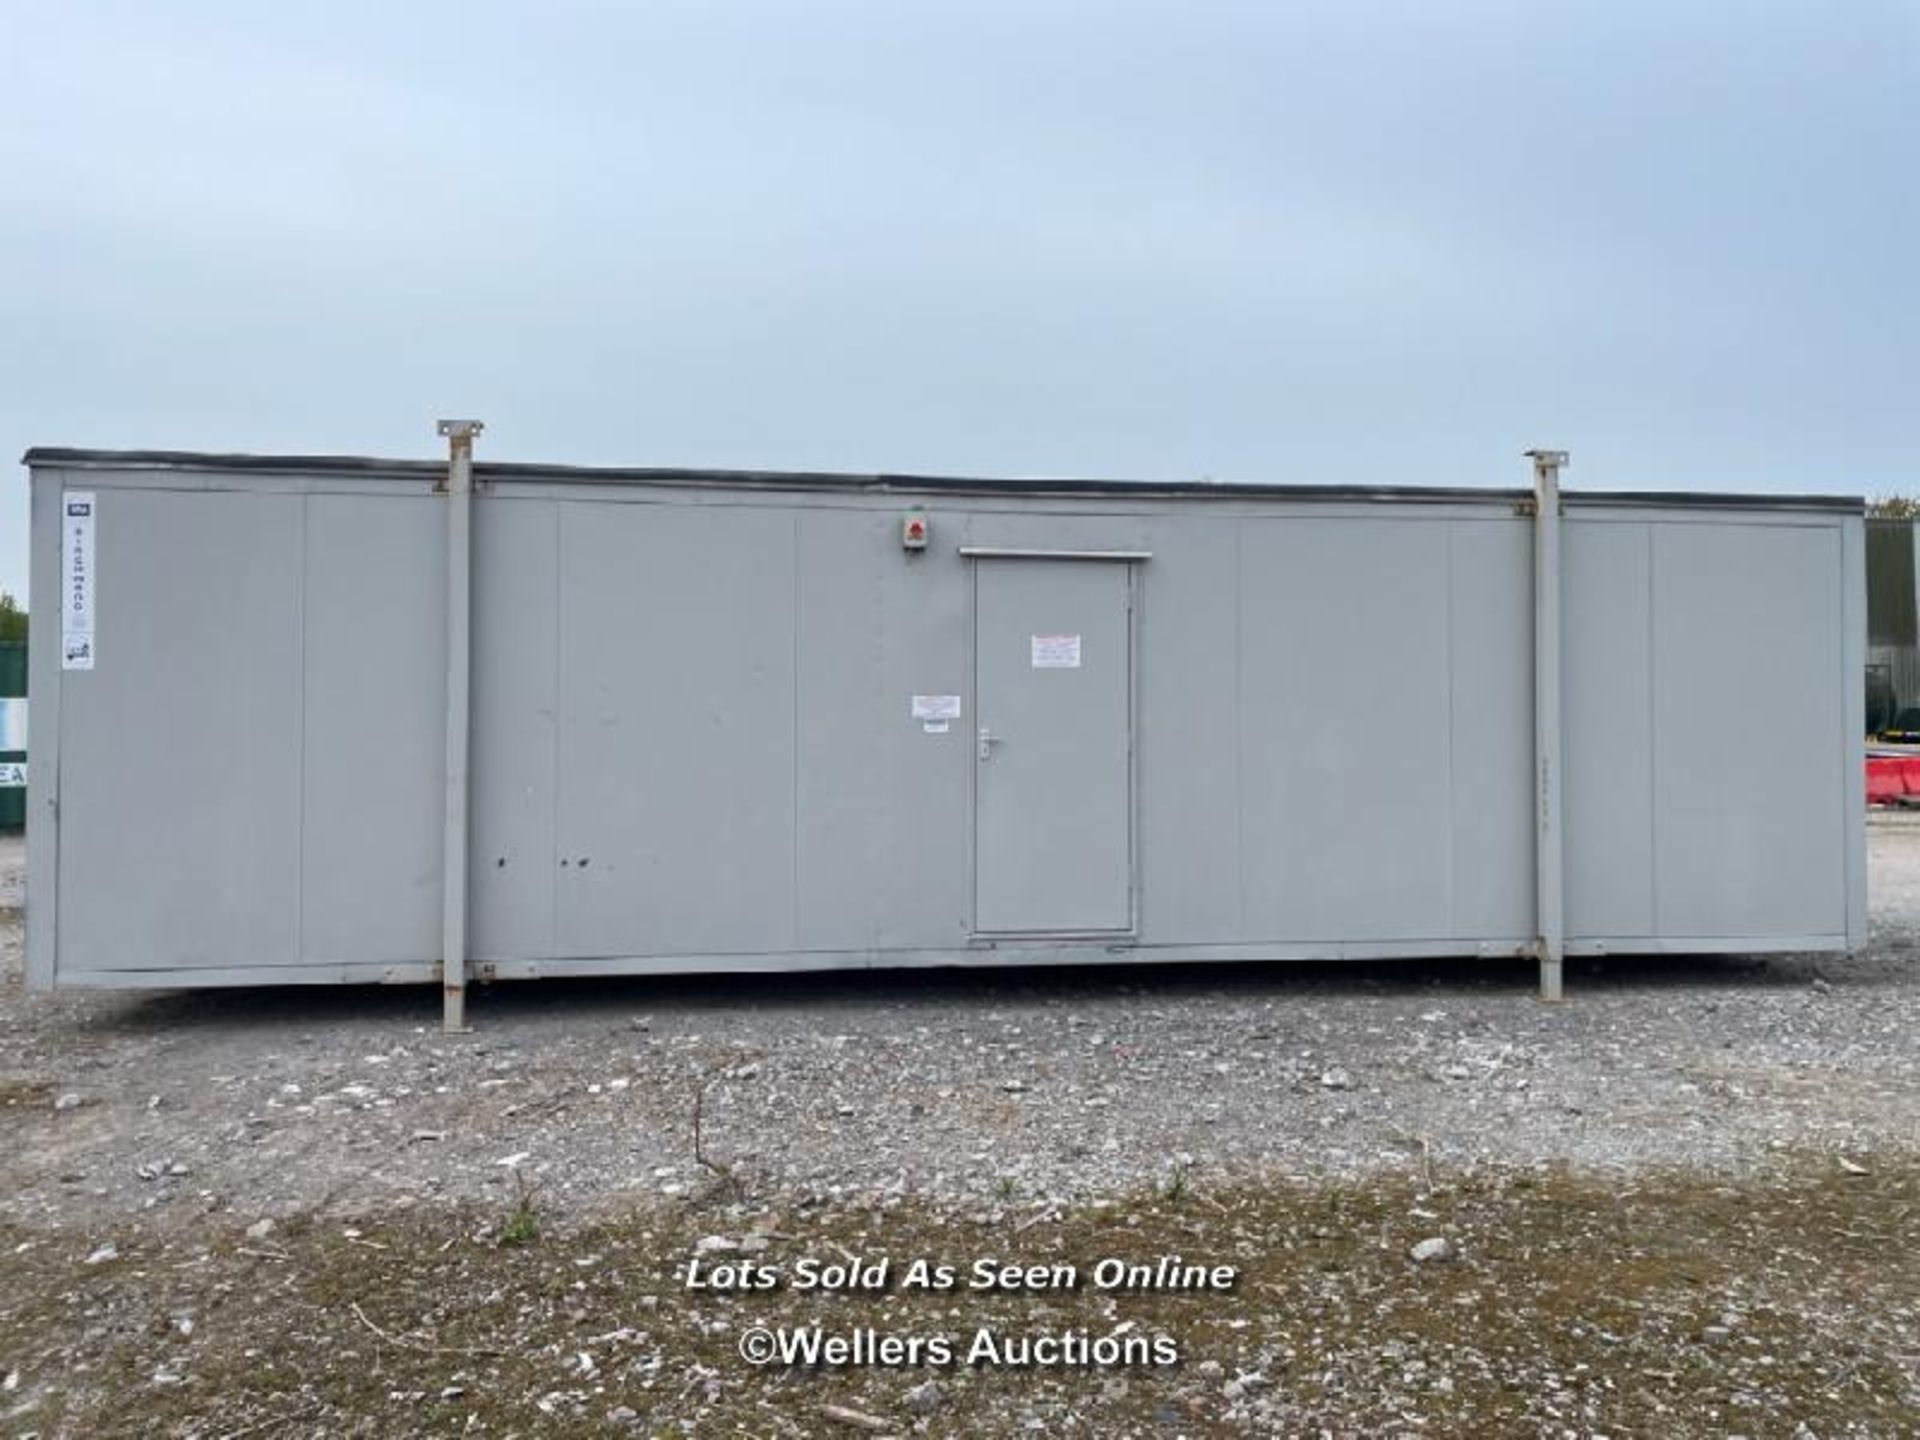 30' x 10' PORTABLE PLASTISOL OFFICE BUILDING, TWO ROOMS, UNIT INCLUDES KITCHENETTE WITH WASH - Image 5 of 21